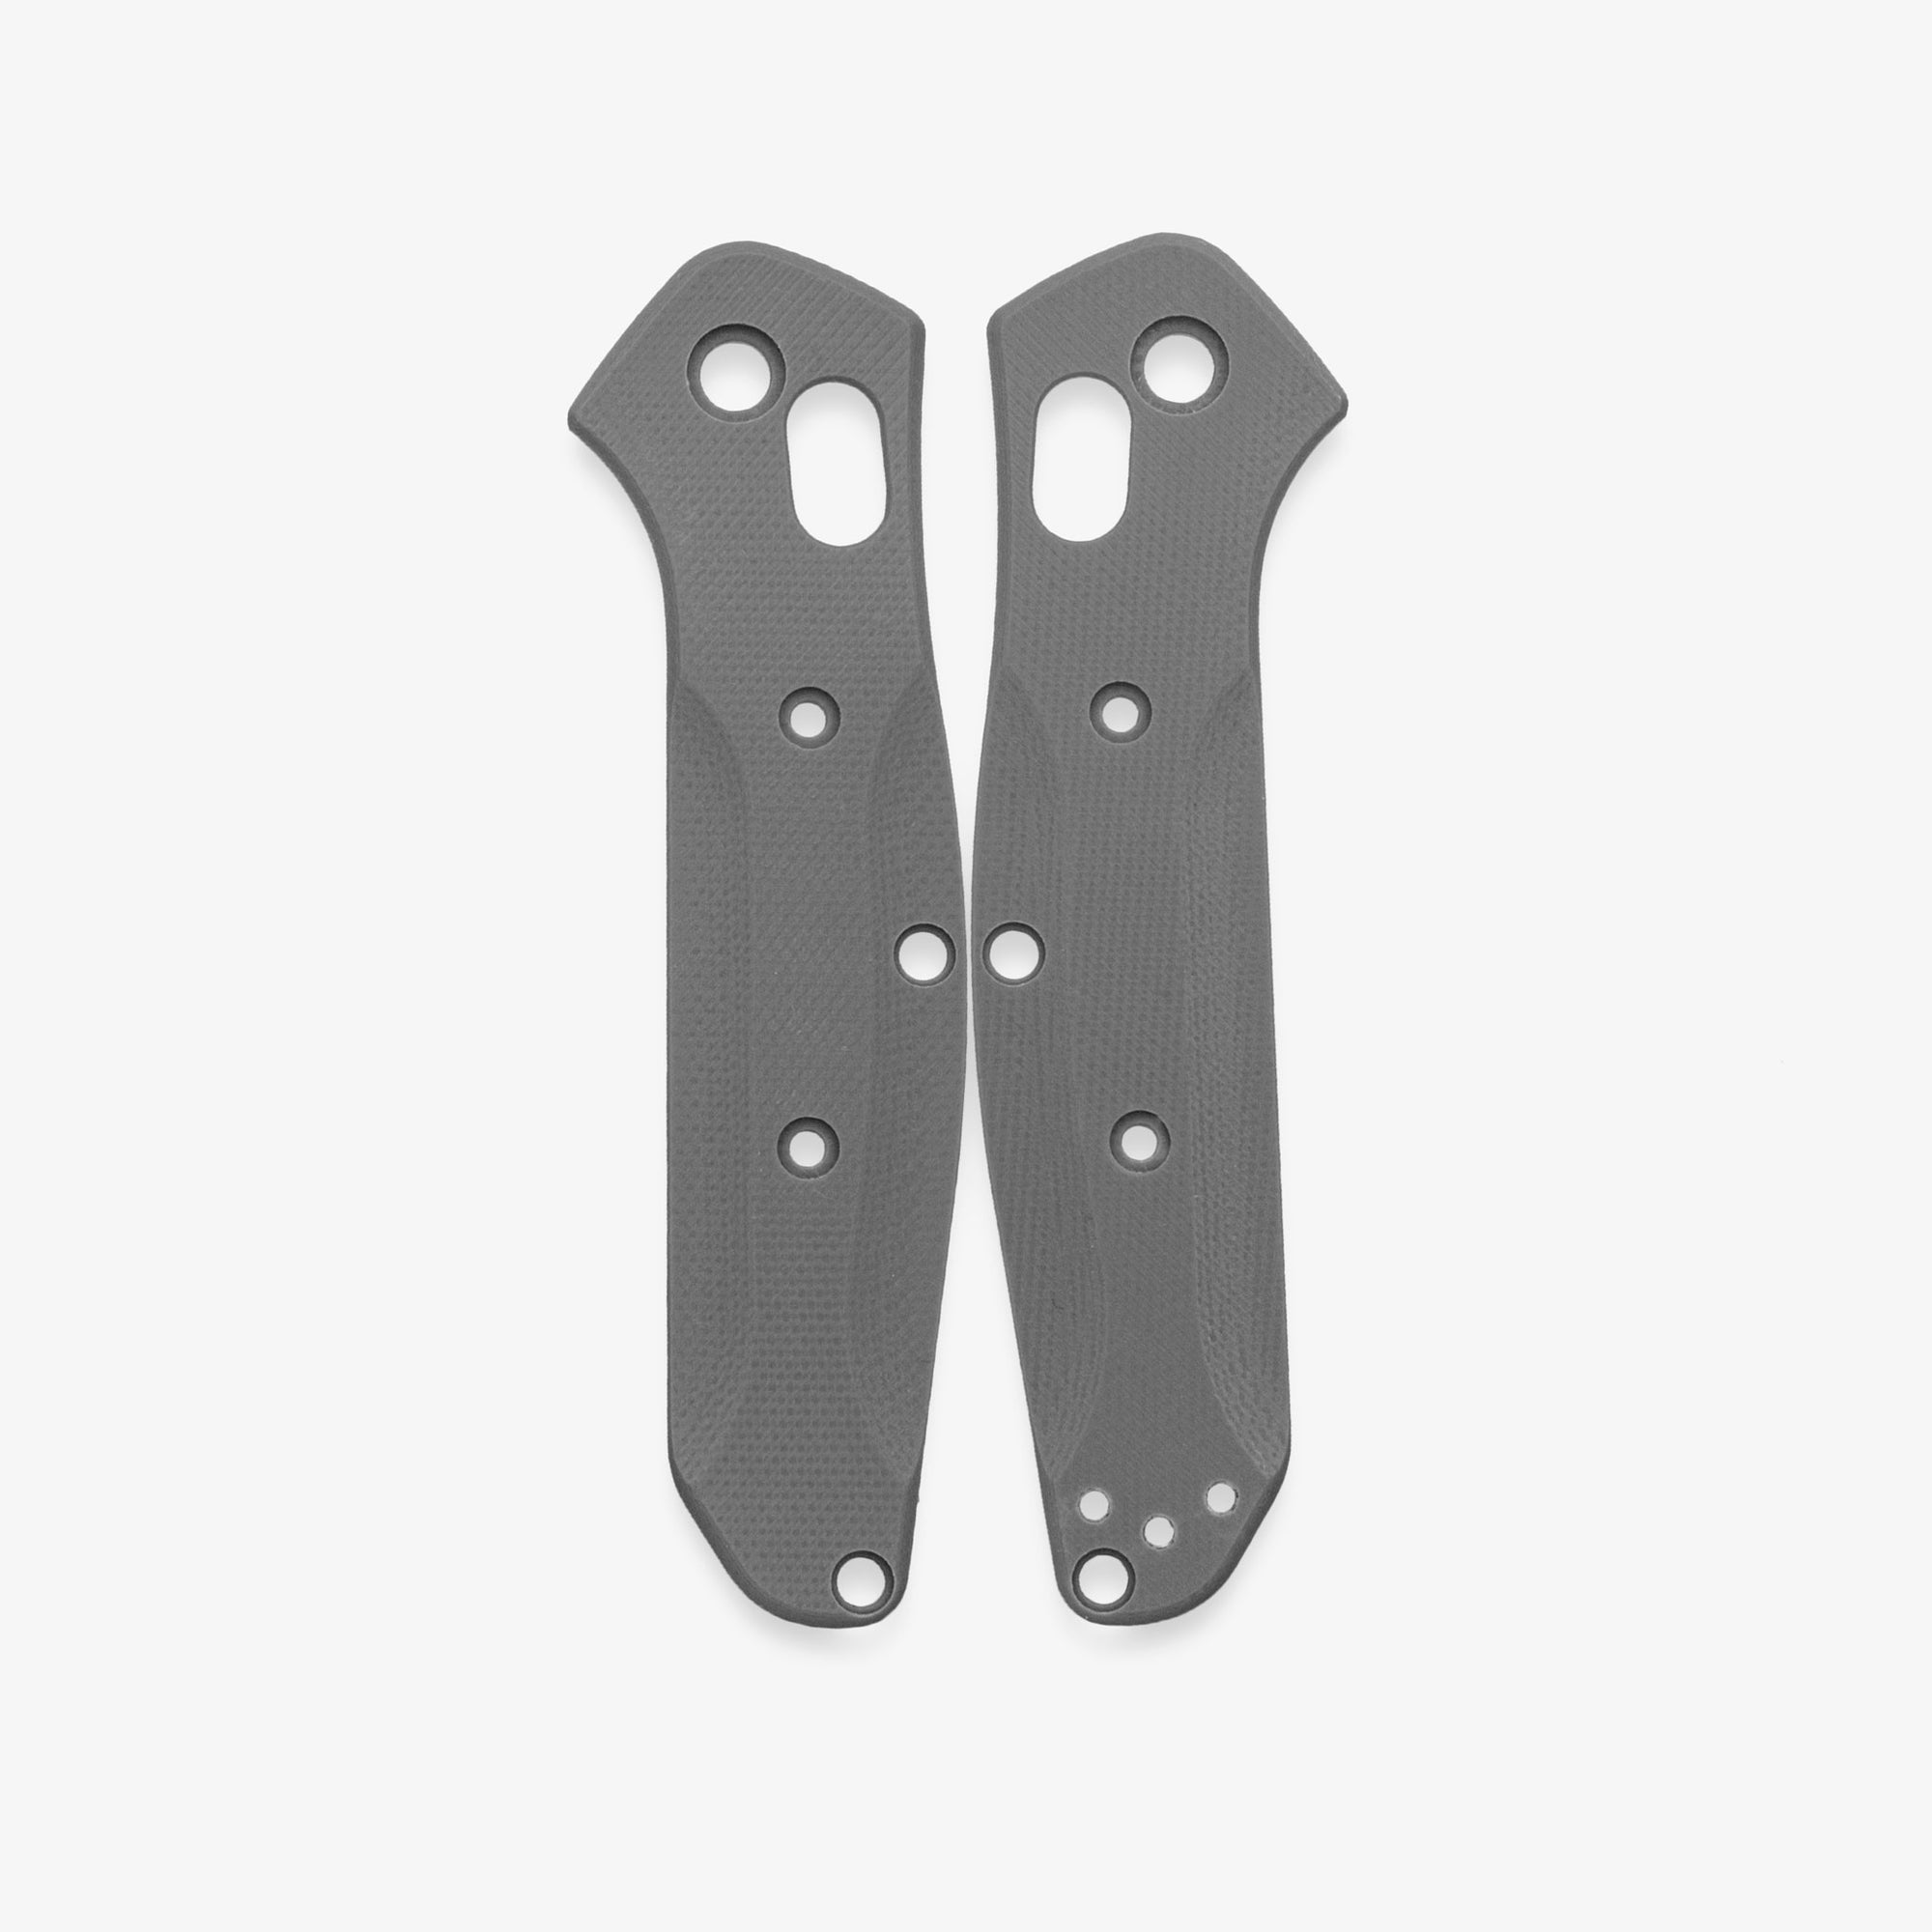 G-10 Scales for Benchmade Mini Osborne 945-Gray Stealth